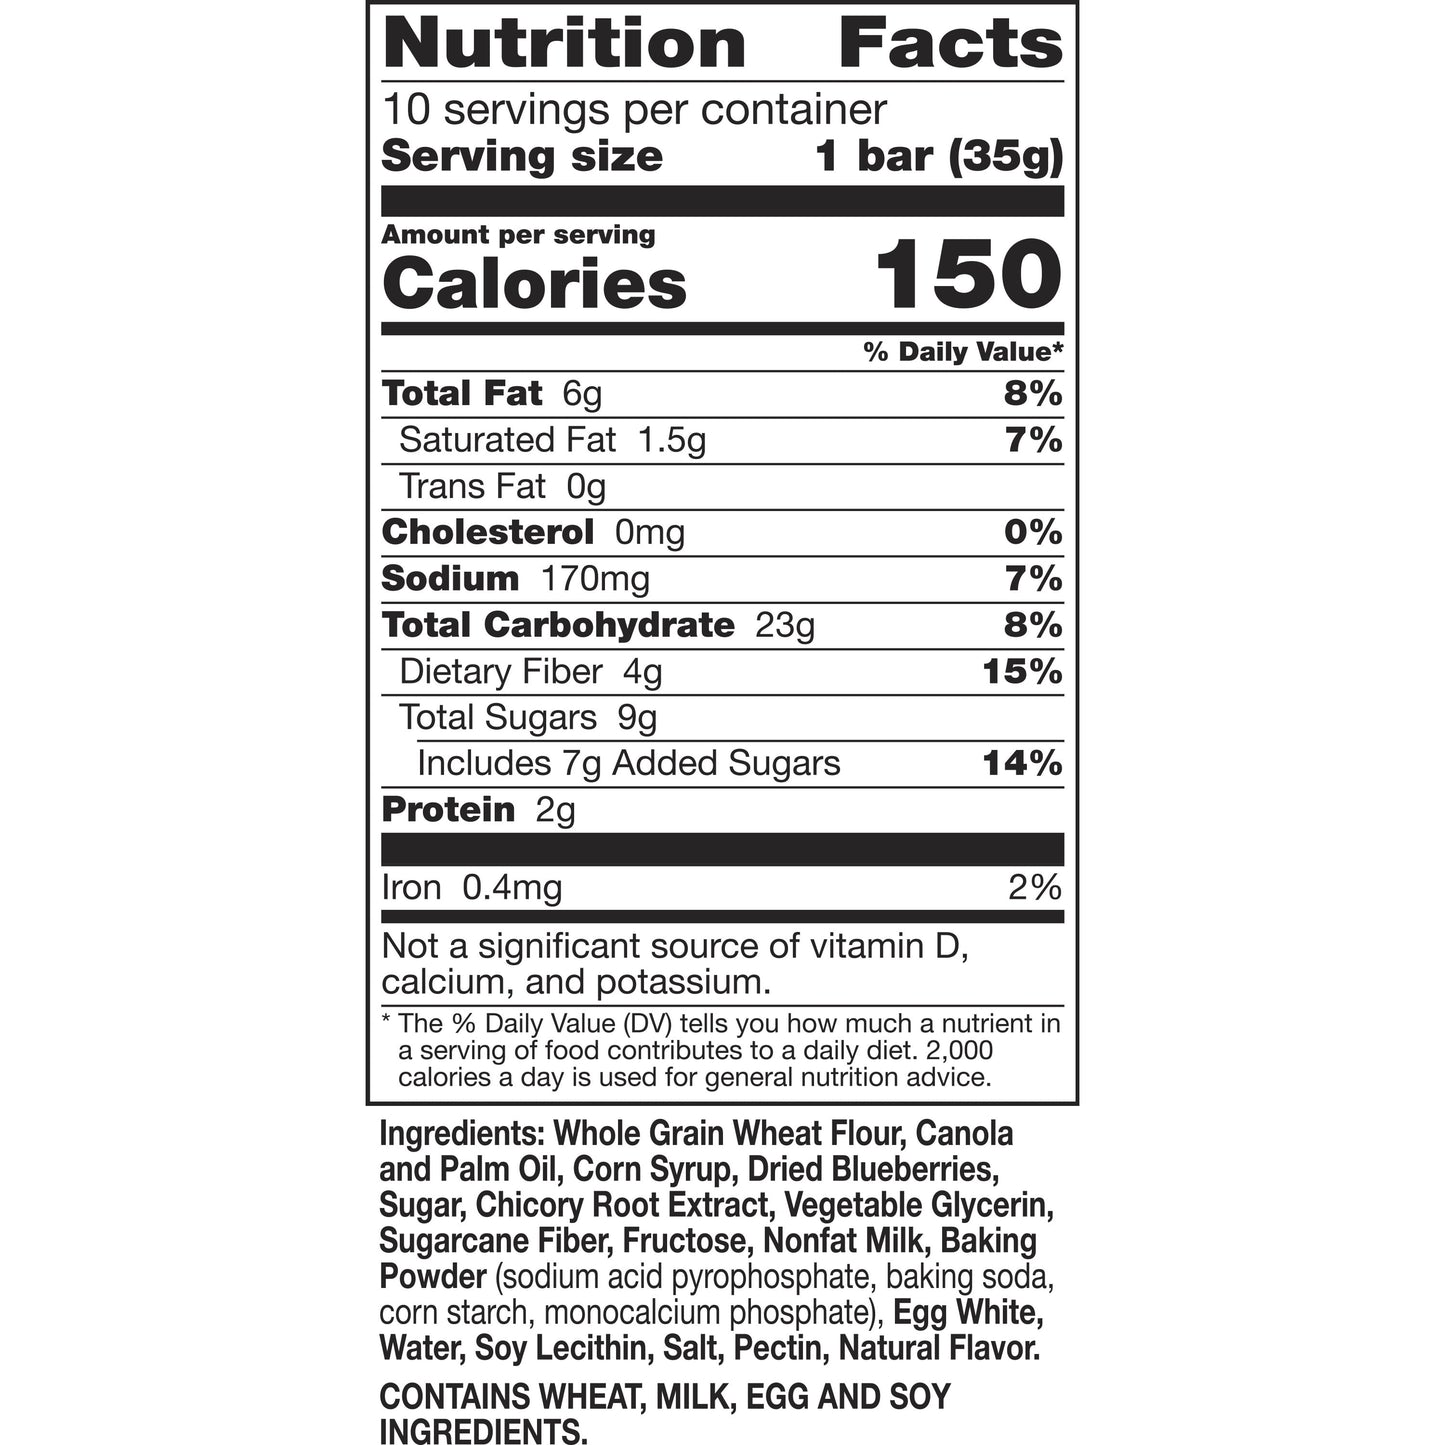 Nature Valley Soft-Baked Muffin Bars, Blueberry, Snack Bars, 10 Bars, 12.4 OZ